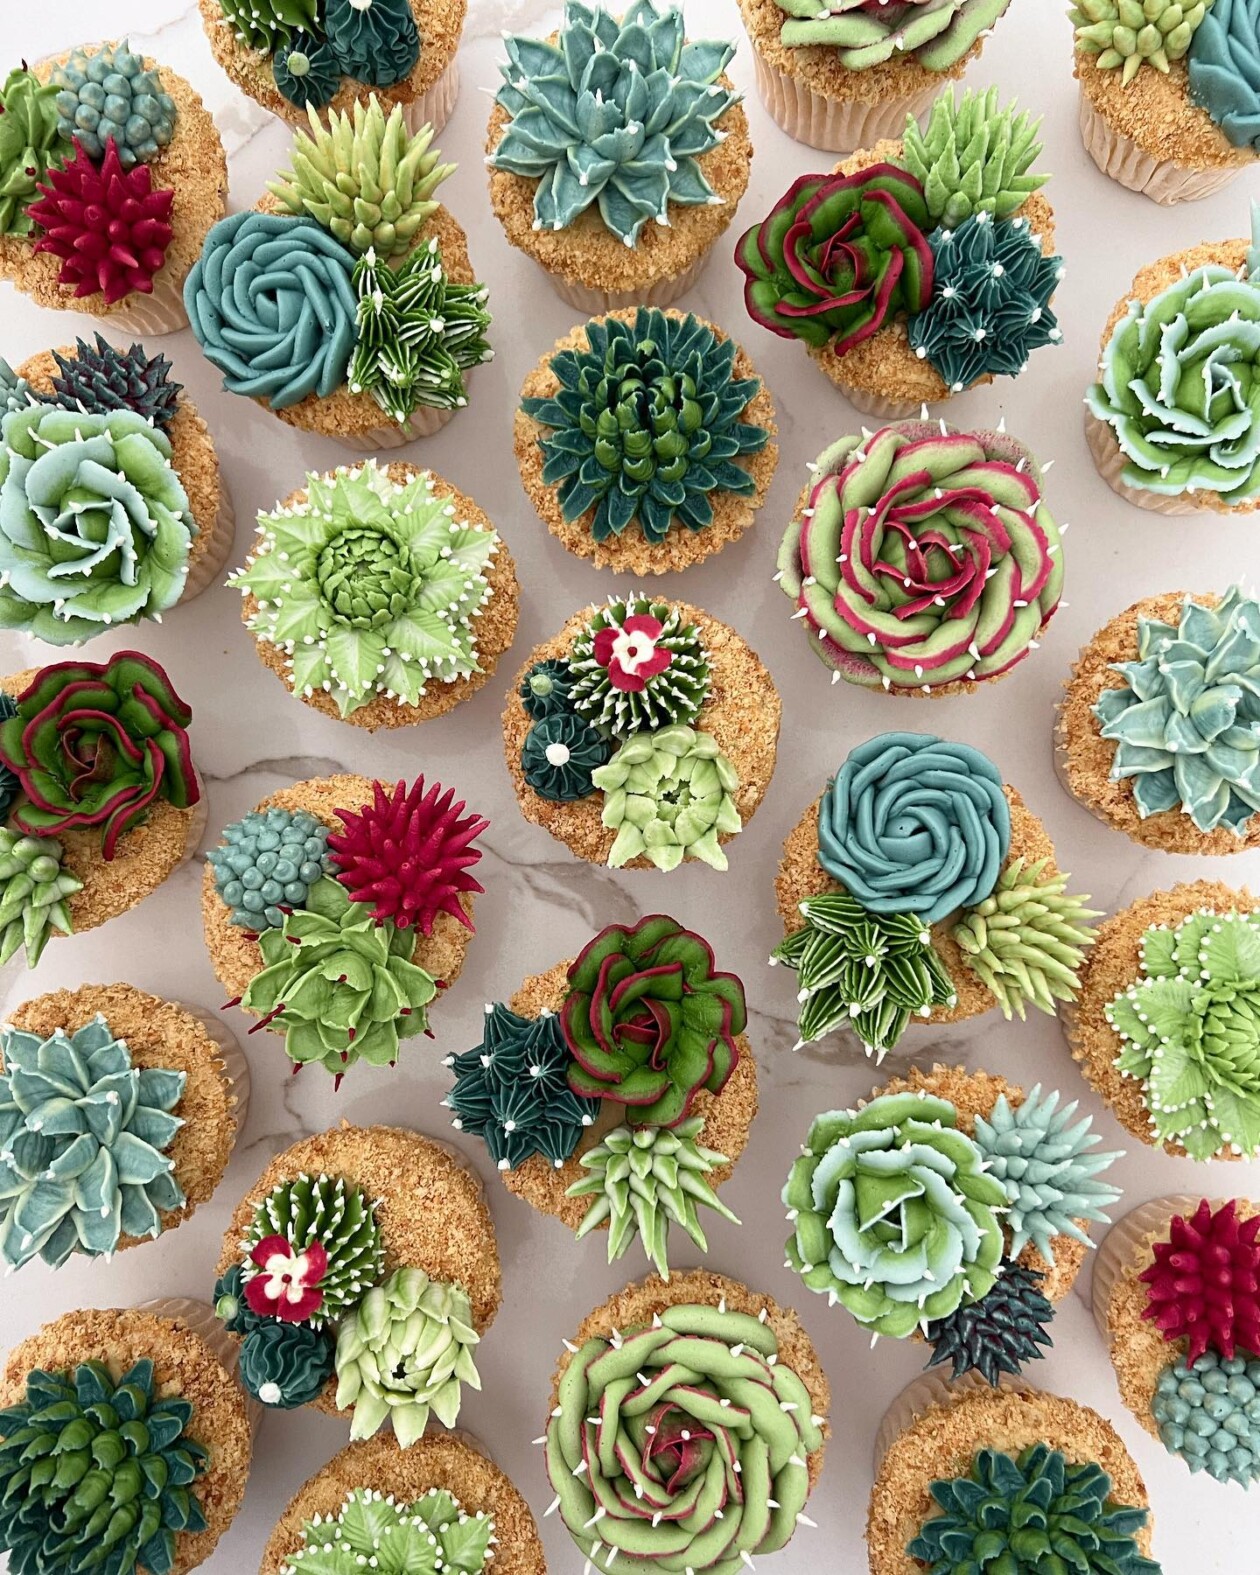 Gorgeous Cupcakes Decorated With Buttercream Flowers And Succulents By Kerry's Bouqcakes (13)